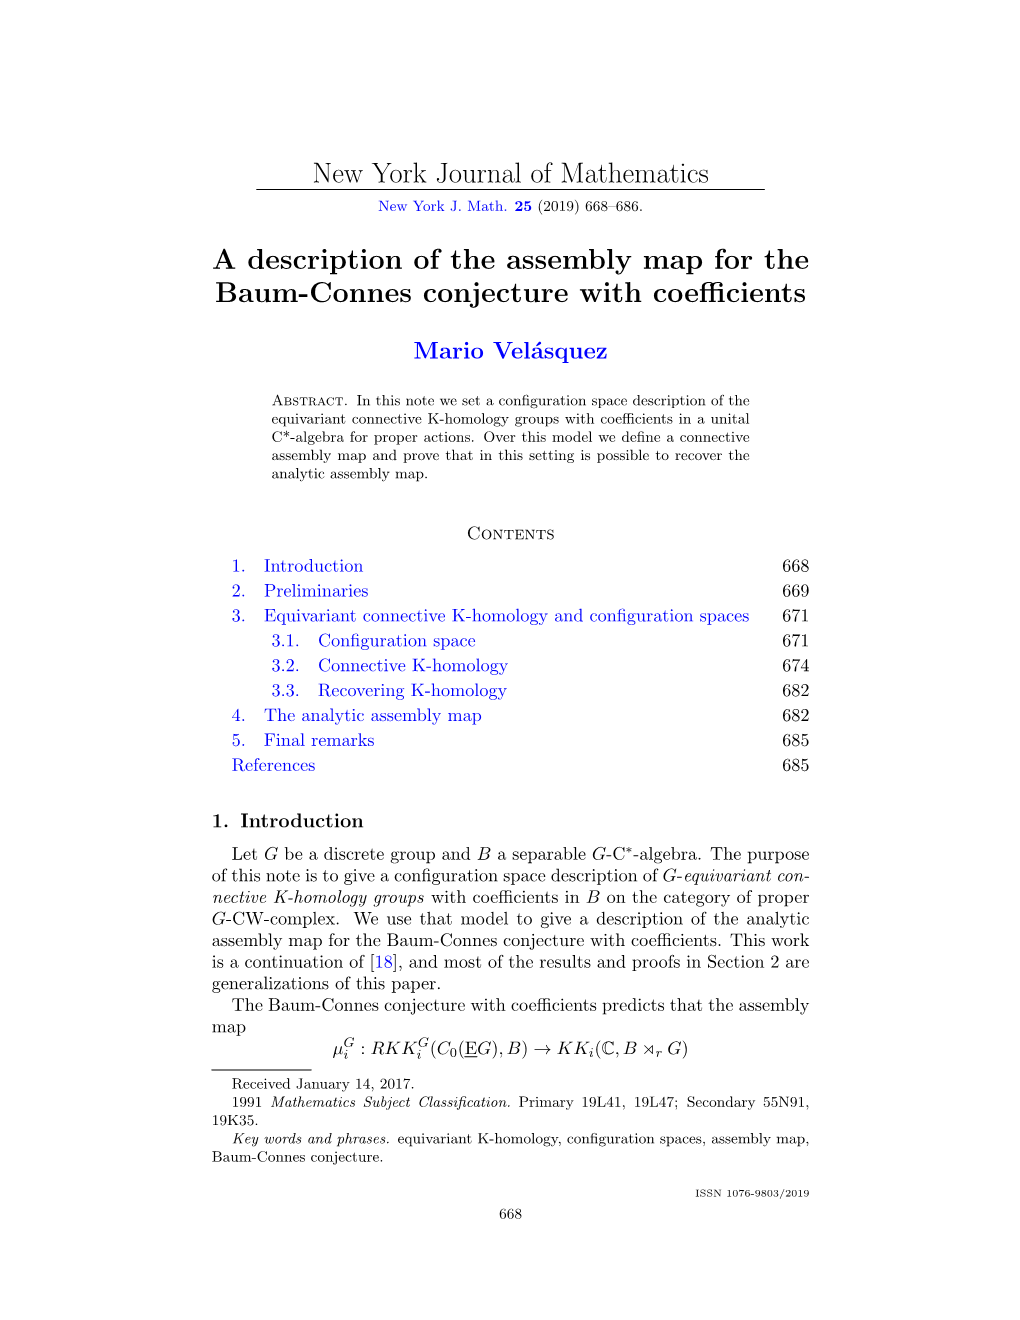 New York Journal of Mathematics a Description of the Assembly Map For